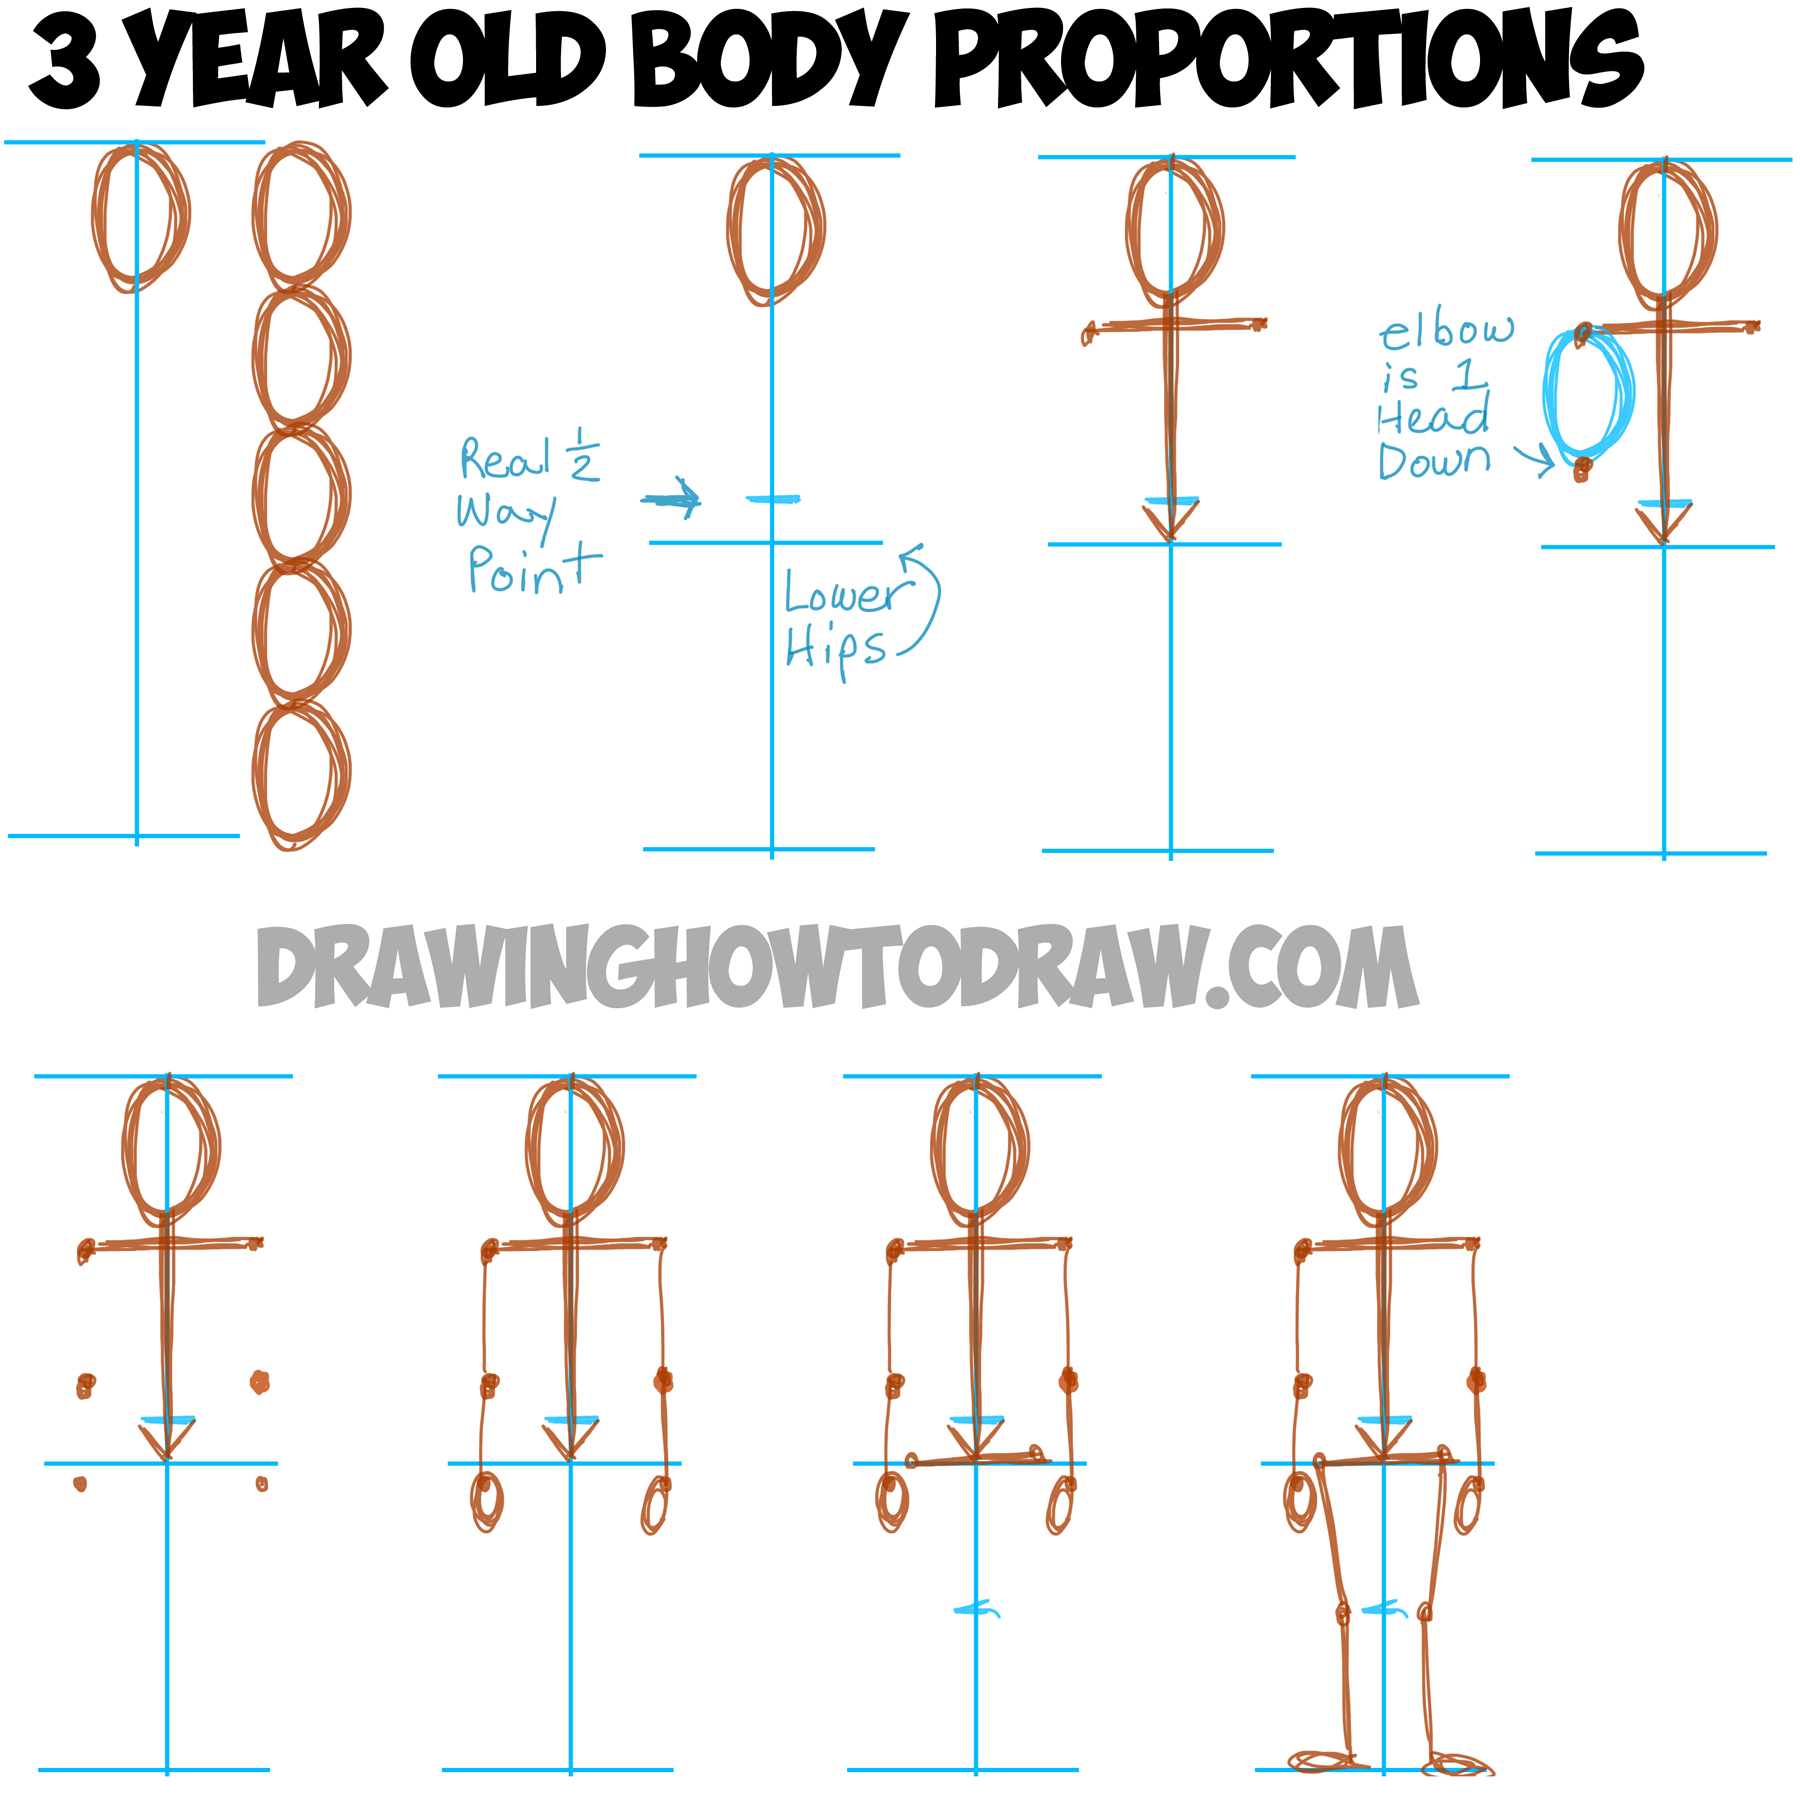 Drawing a 3 Year Old Child in the Correct Proportions